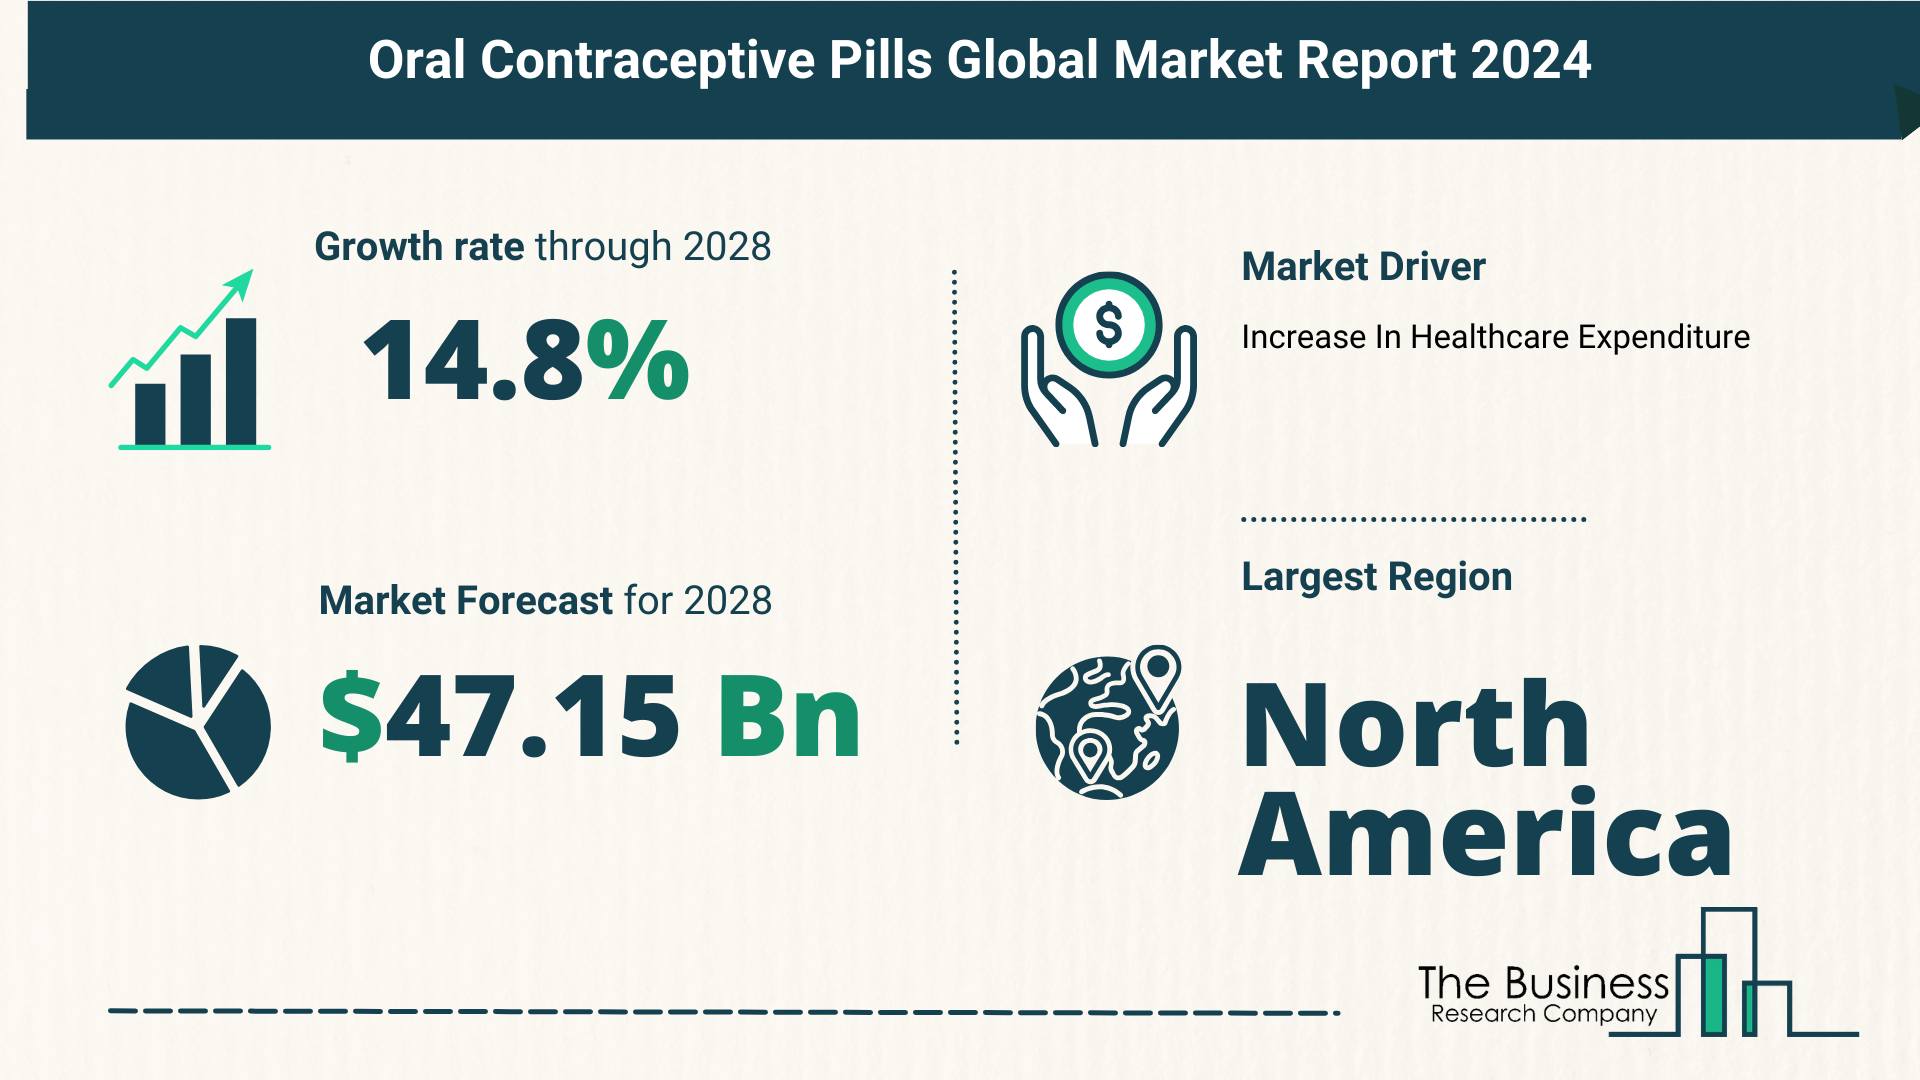 Global Oral Contraceptive Pills Market Report 2024 – Top Market Trends And Opportunities